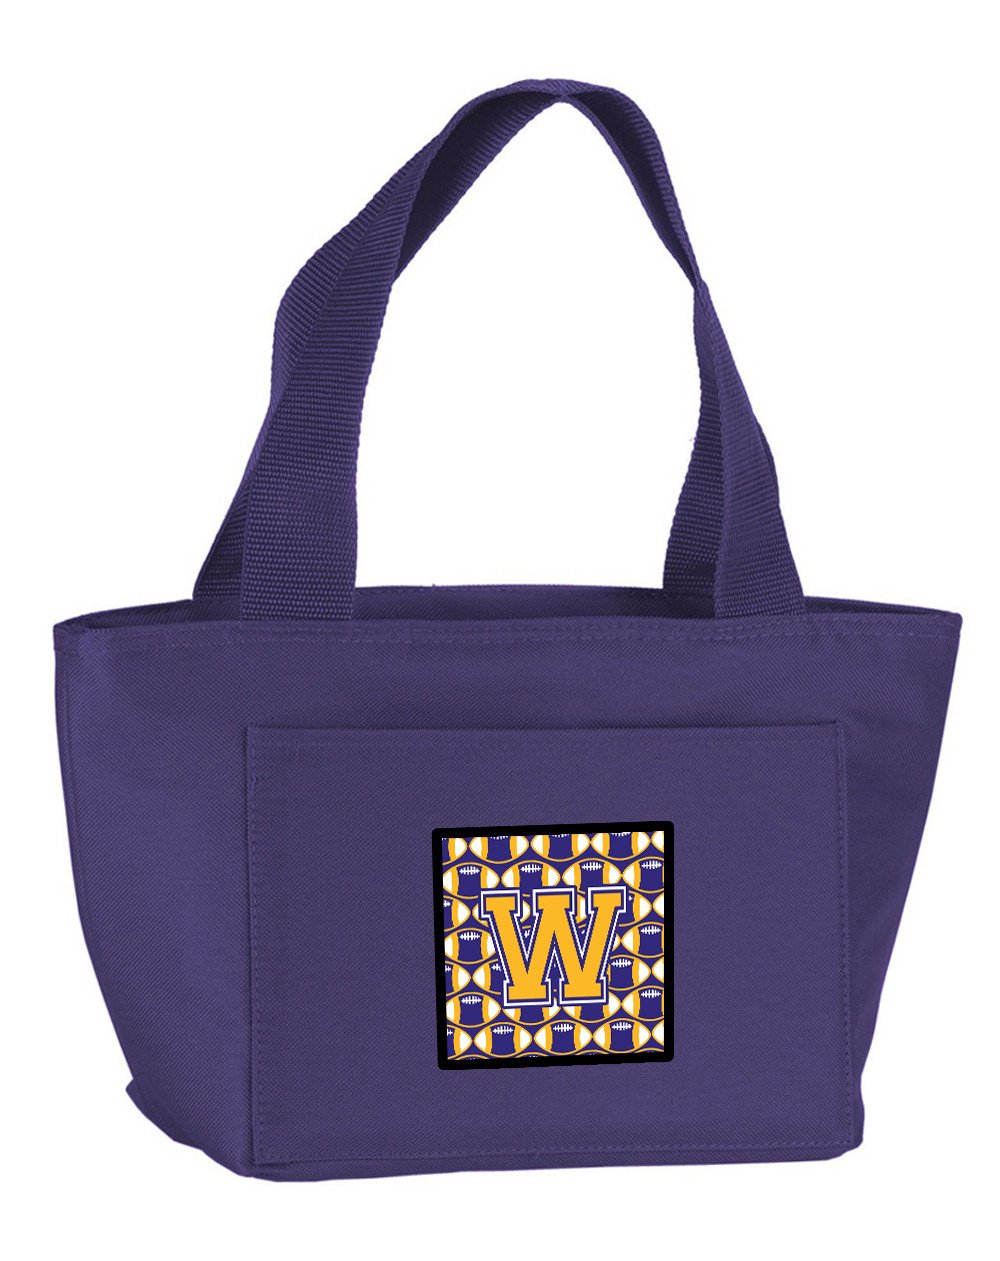 Letter W Football Purple and Gold Lunch Bag CJ1064-WPR-8808 by Caroline's Treasures